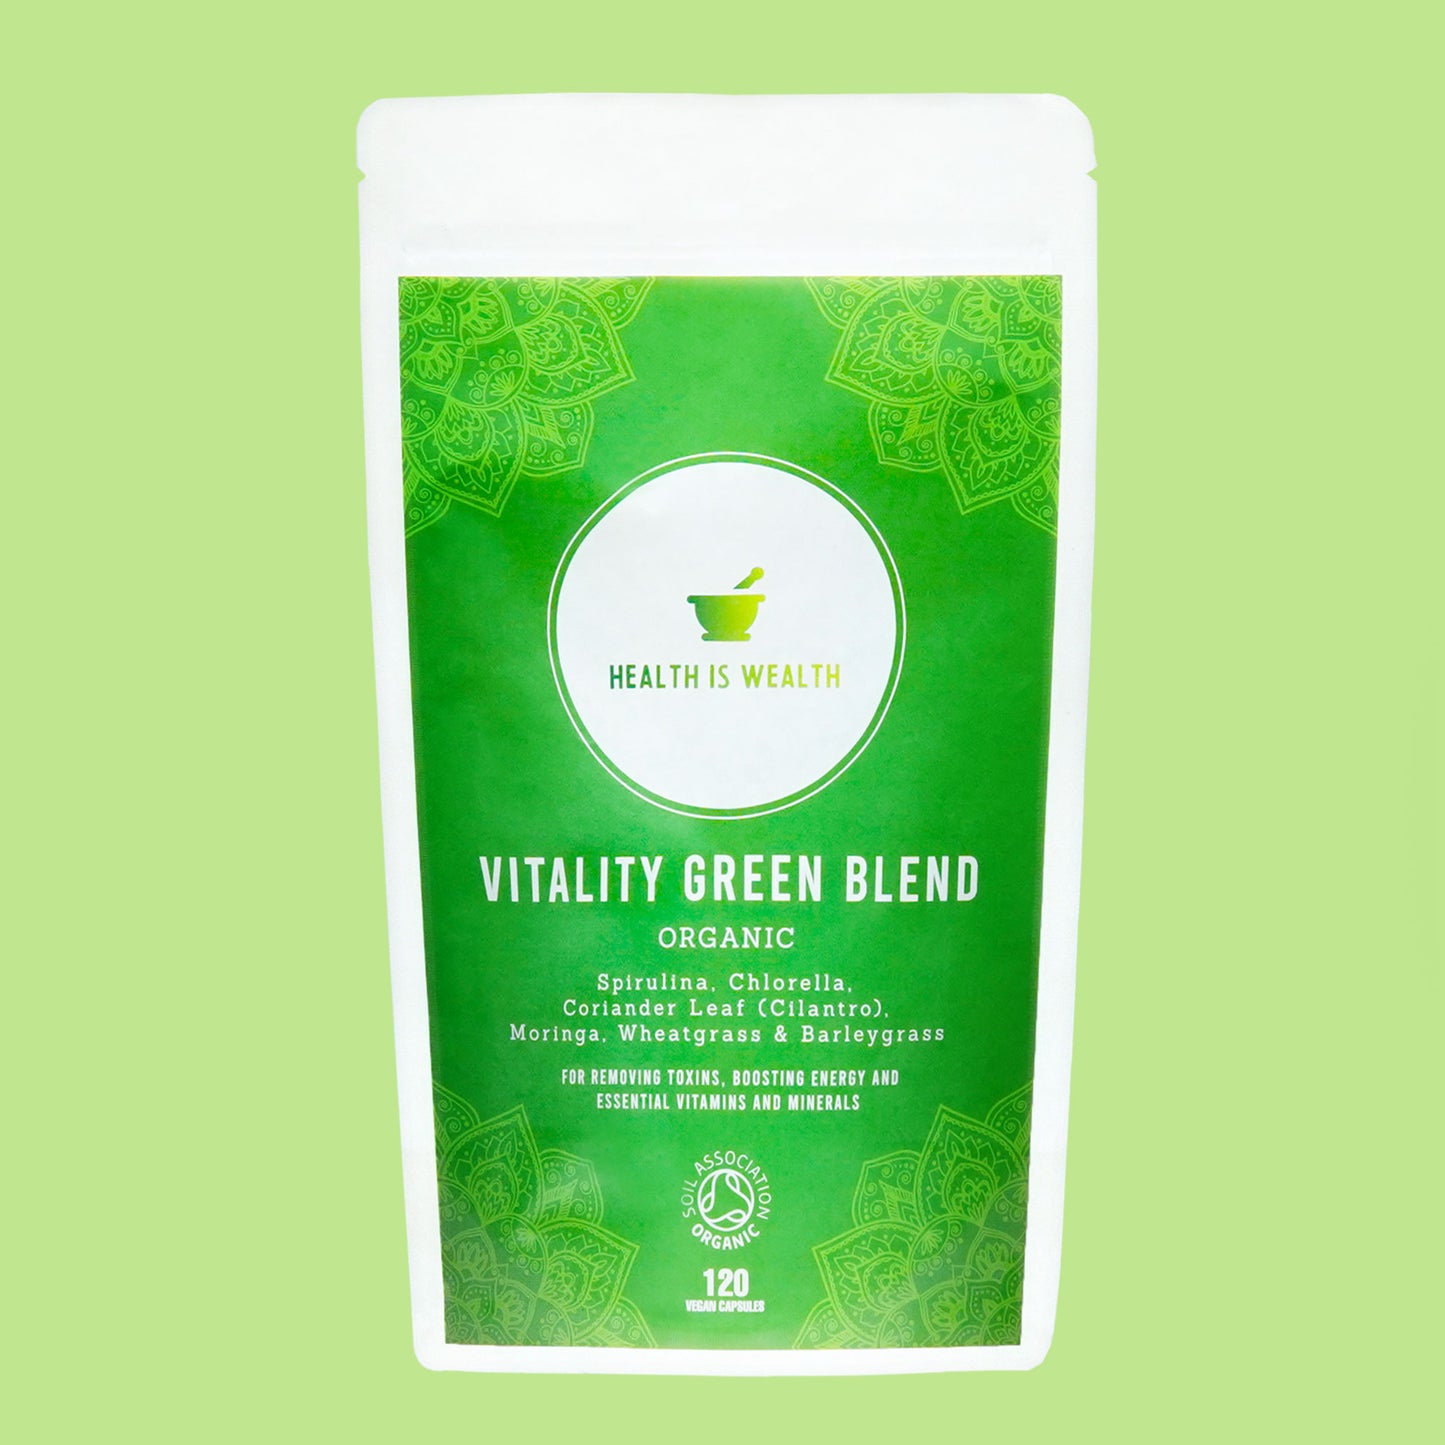 The image features a product called "Vitality Green Blend" from Health is Wealth, showcased in a vibrant green, stand-up pouch. The front of the pouch is adorned with intricate mandala designs and lists key ingredients like Spirulina, Chlorella, Moringa, Wheatgrass, Coriander Leaf (Cilantro) and Barleygrass. It's labeled as a superfood blend that supports detoxification, is a natural energy booster and provides essential vitamins and minerals. An organic food supplement containing 120 capsules.